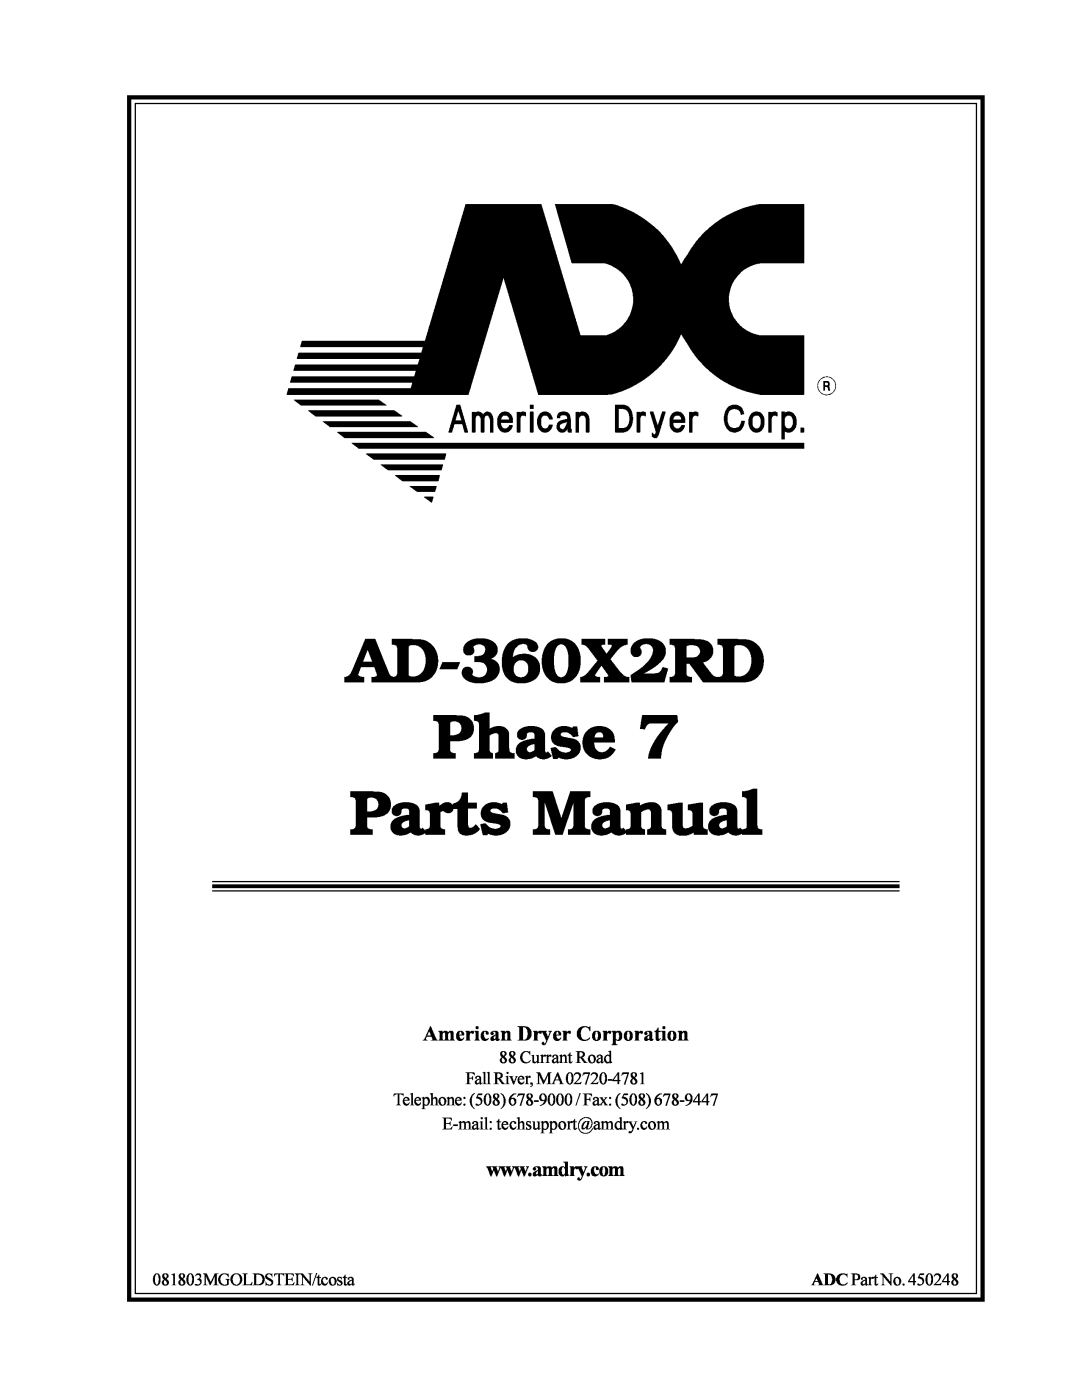 American Dryer Corp AD-360X2RD manual American Dryer Corporation, Phase, Parts Manual, Currant Road, ADC Part No 